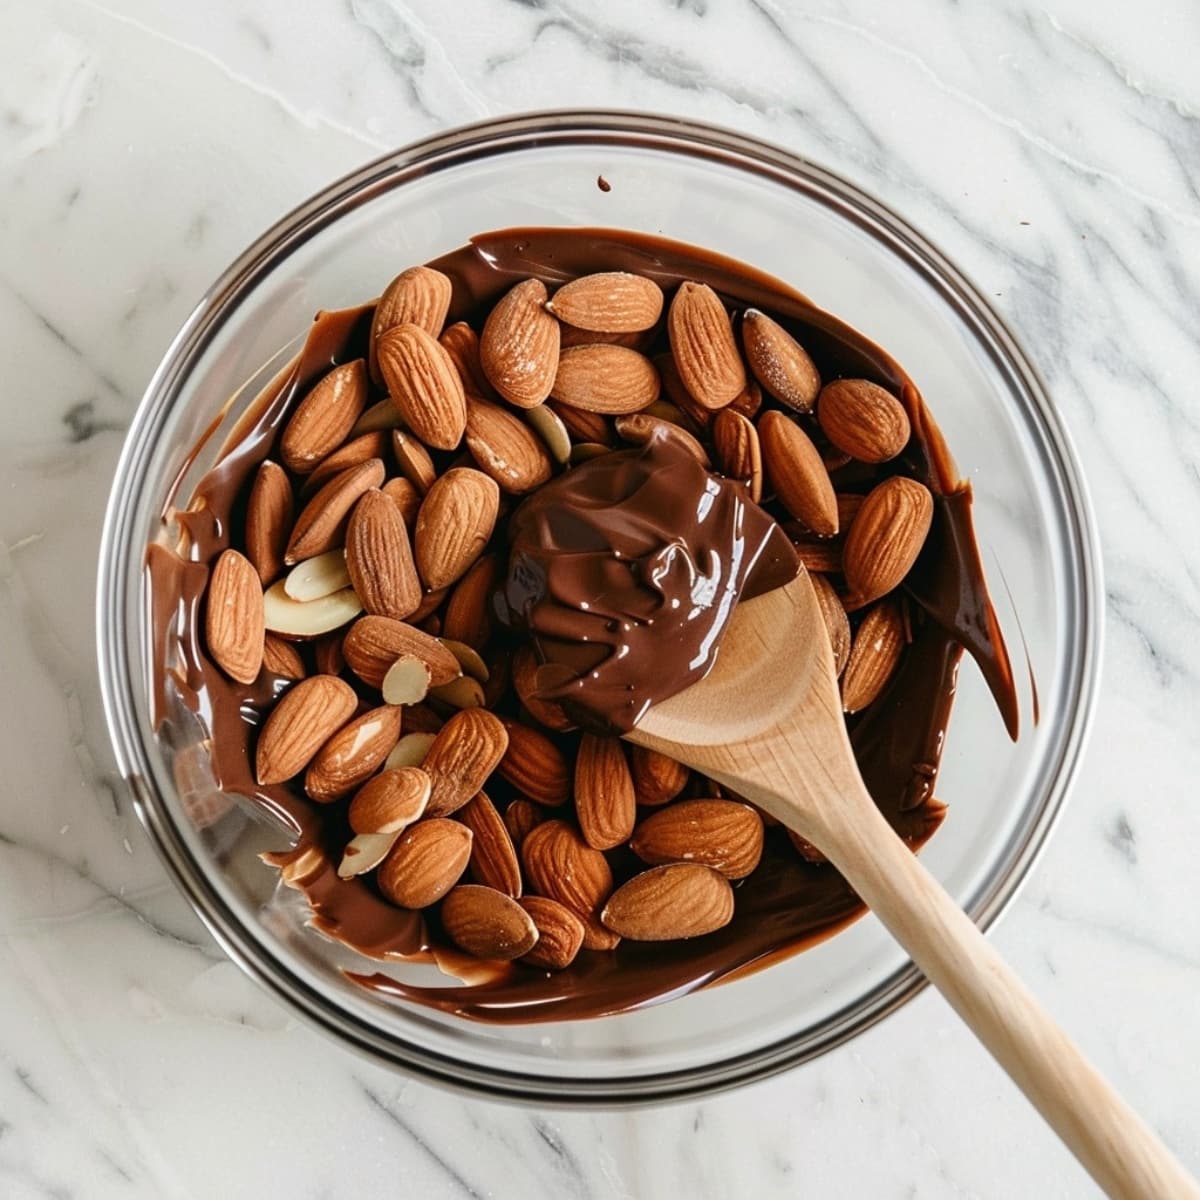 Toasted almonds tossed in melted chocolate.